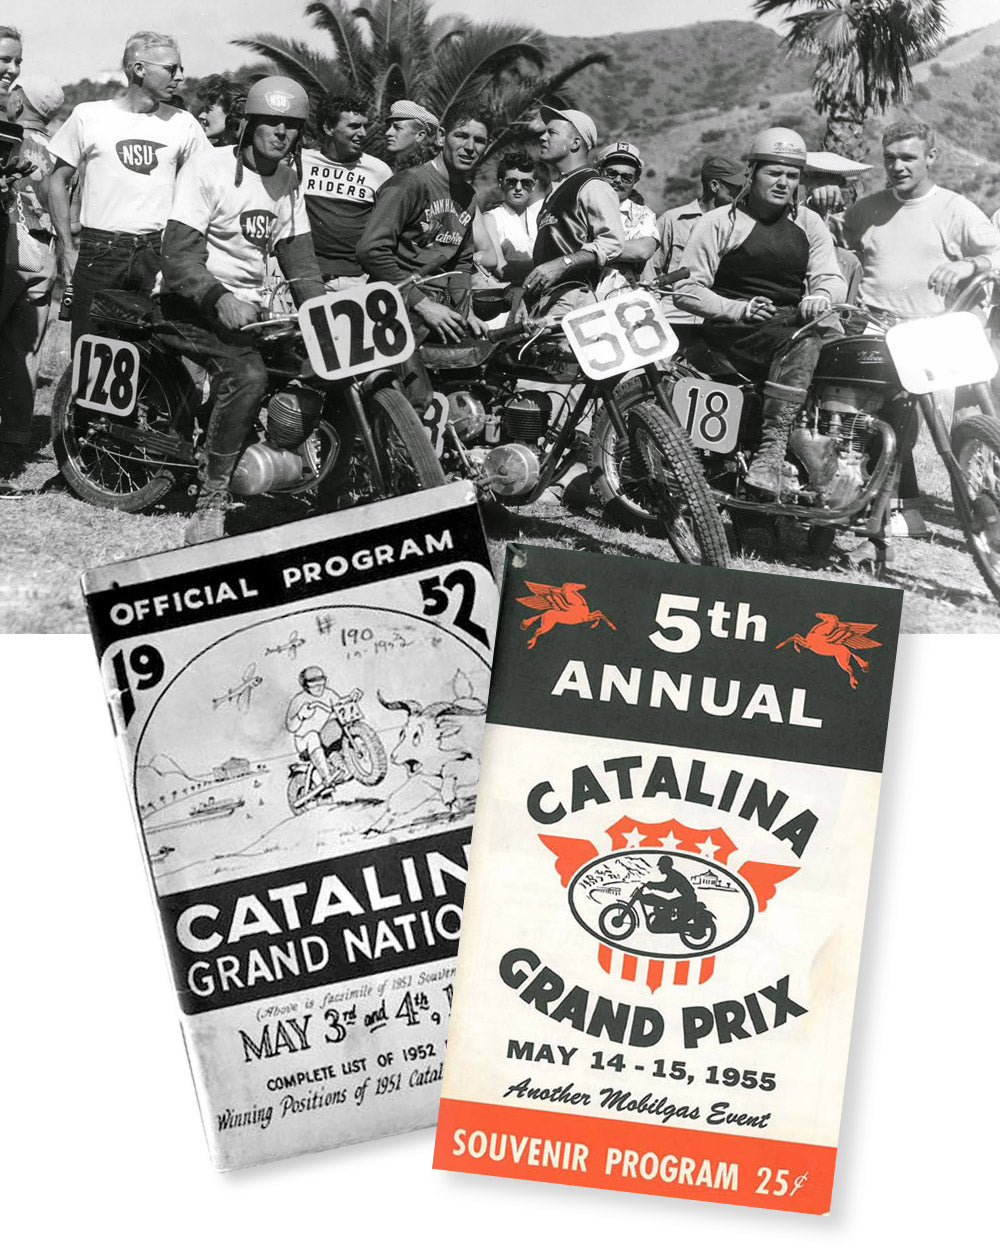 The Catalina Grand Prix: A Revival of Racing History